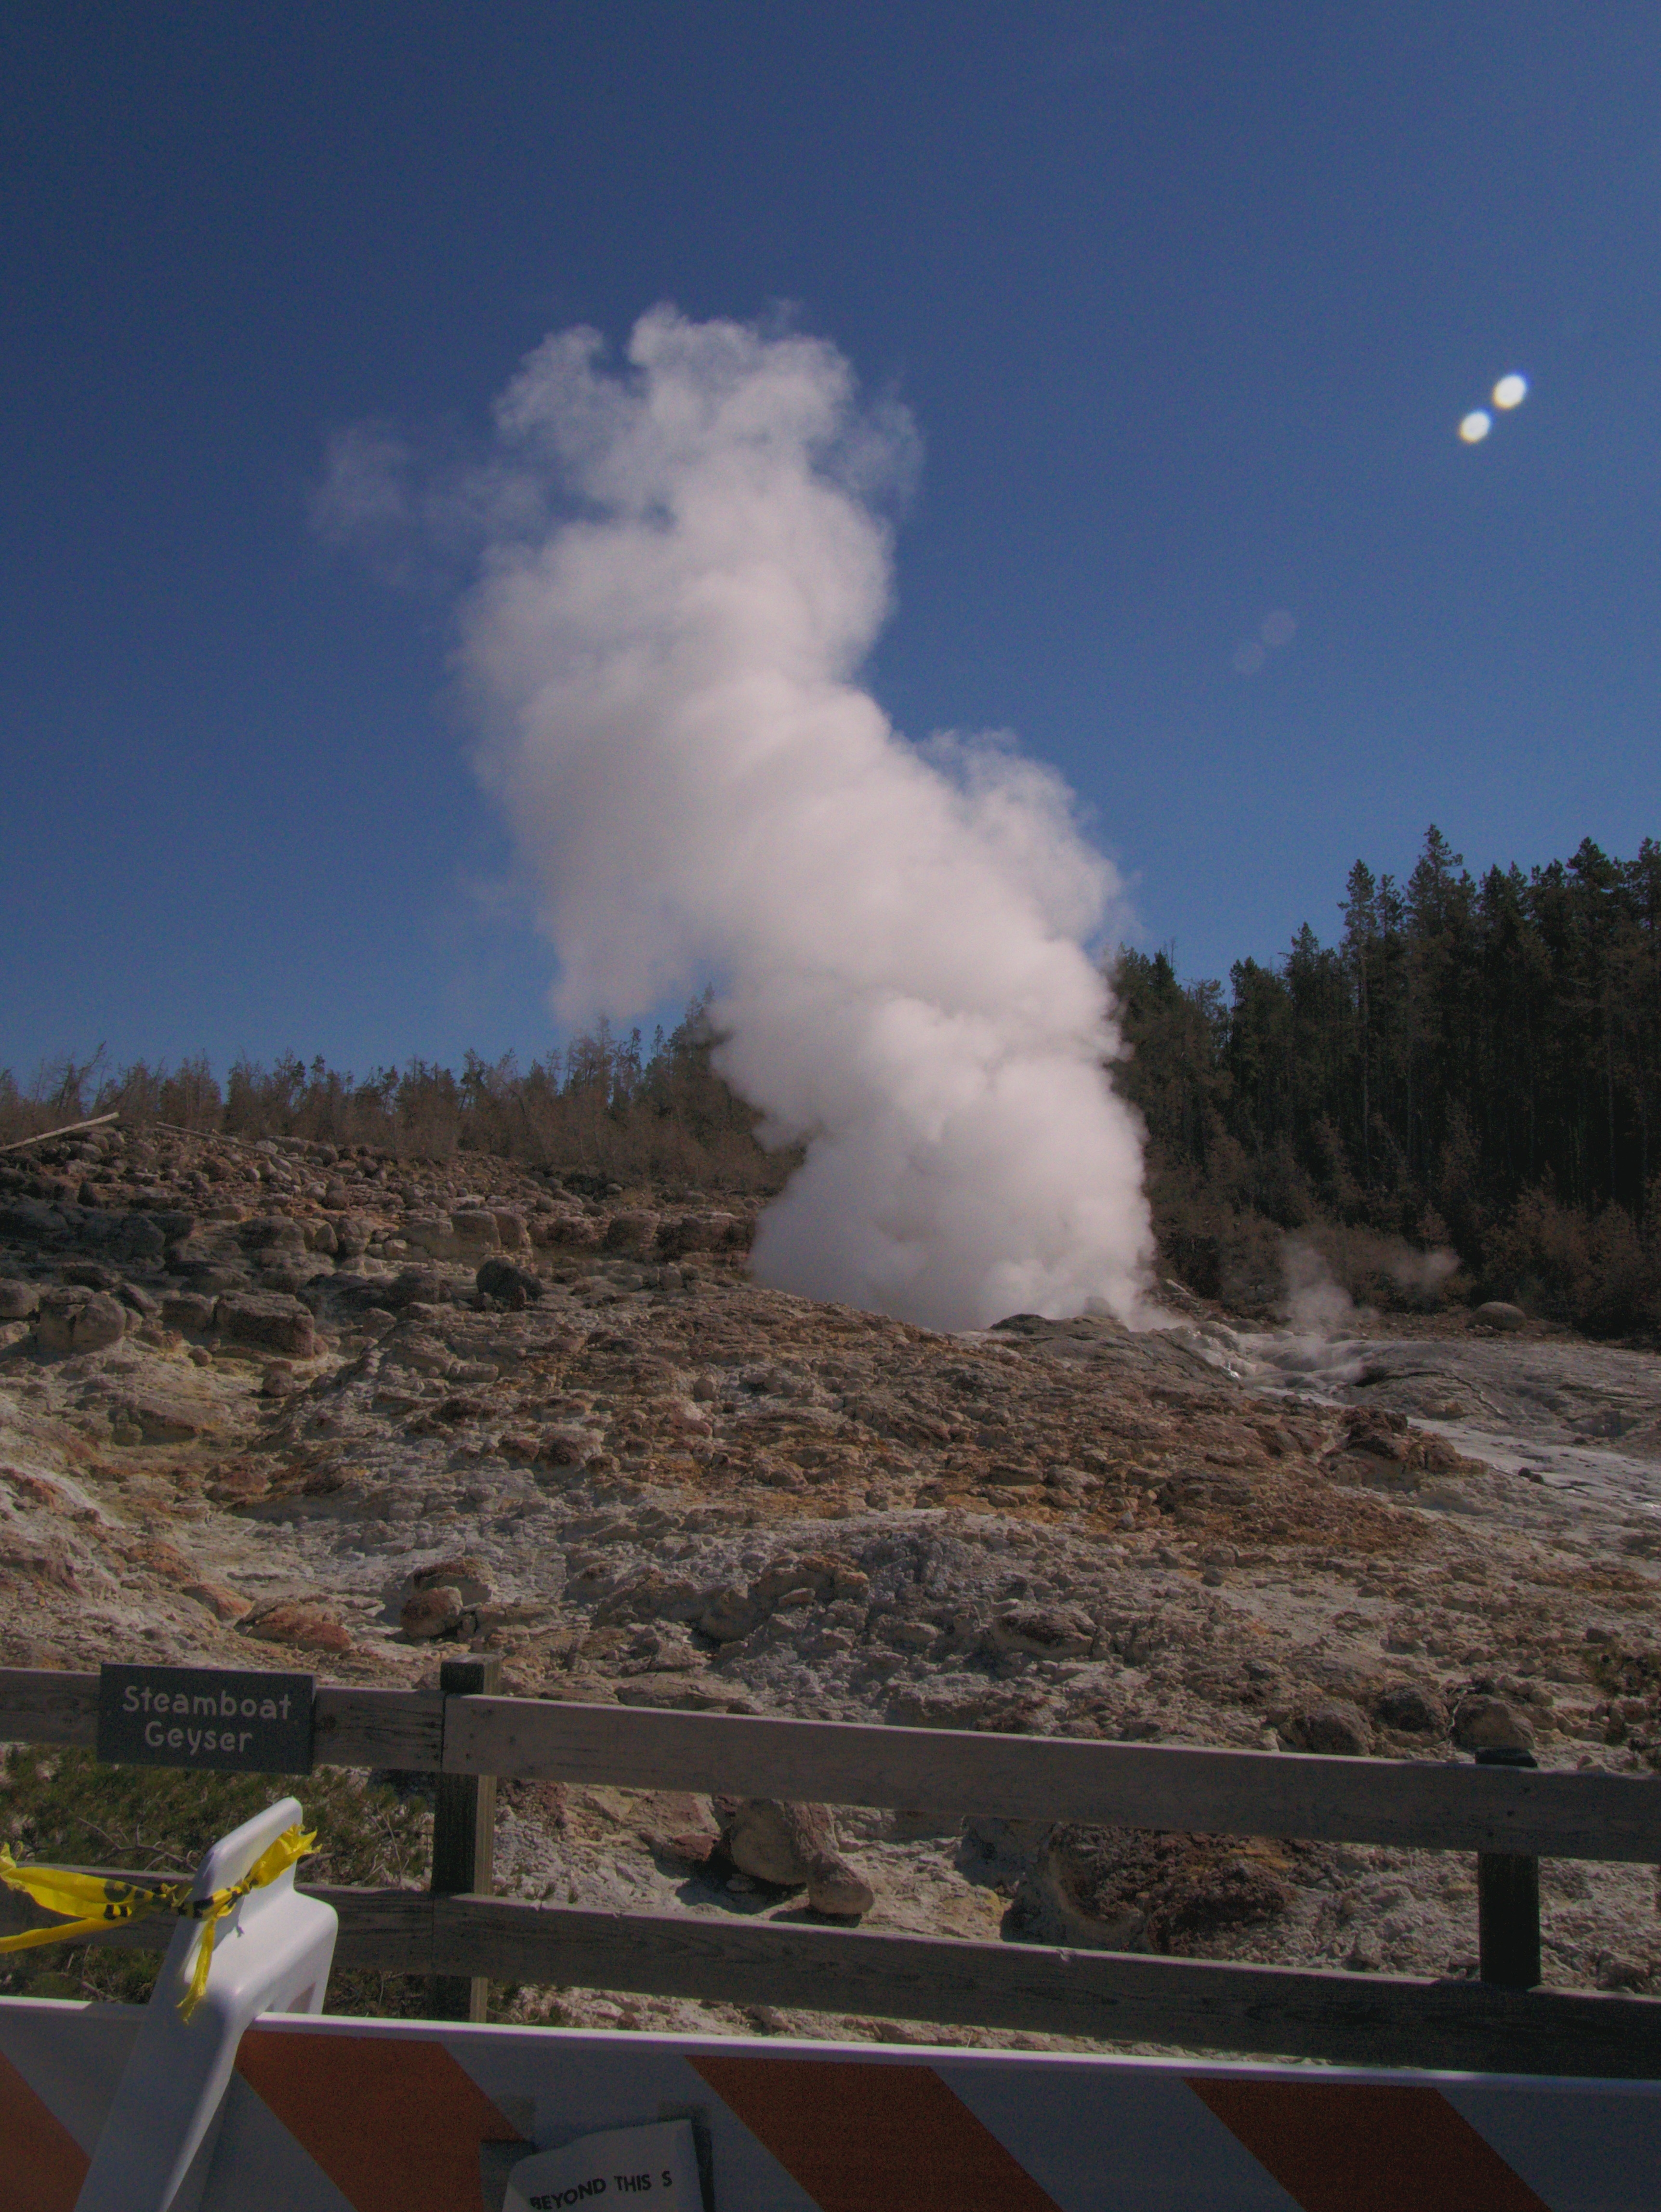 Steamboat geyser with a lot of steam from the lower point